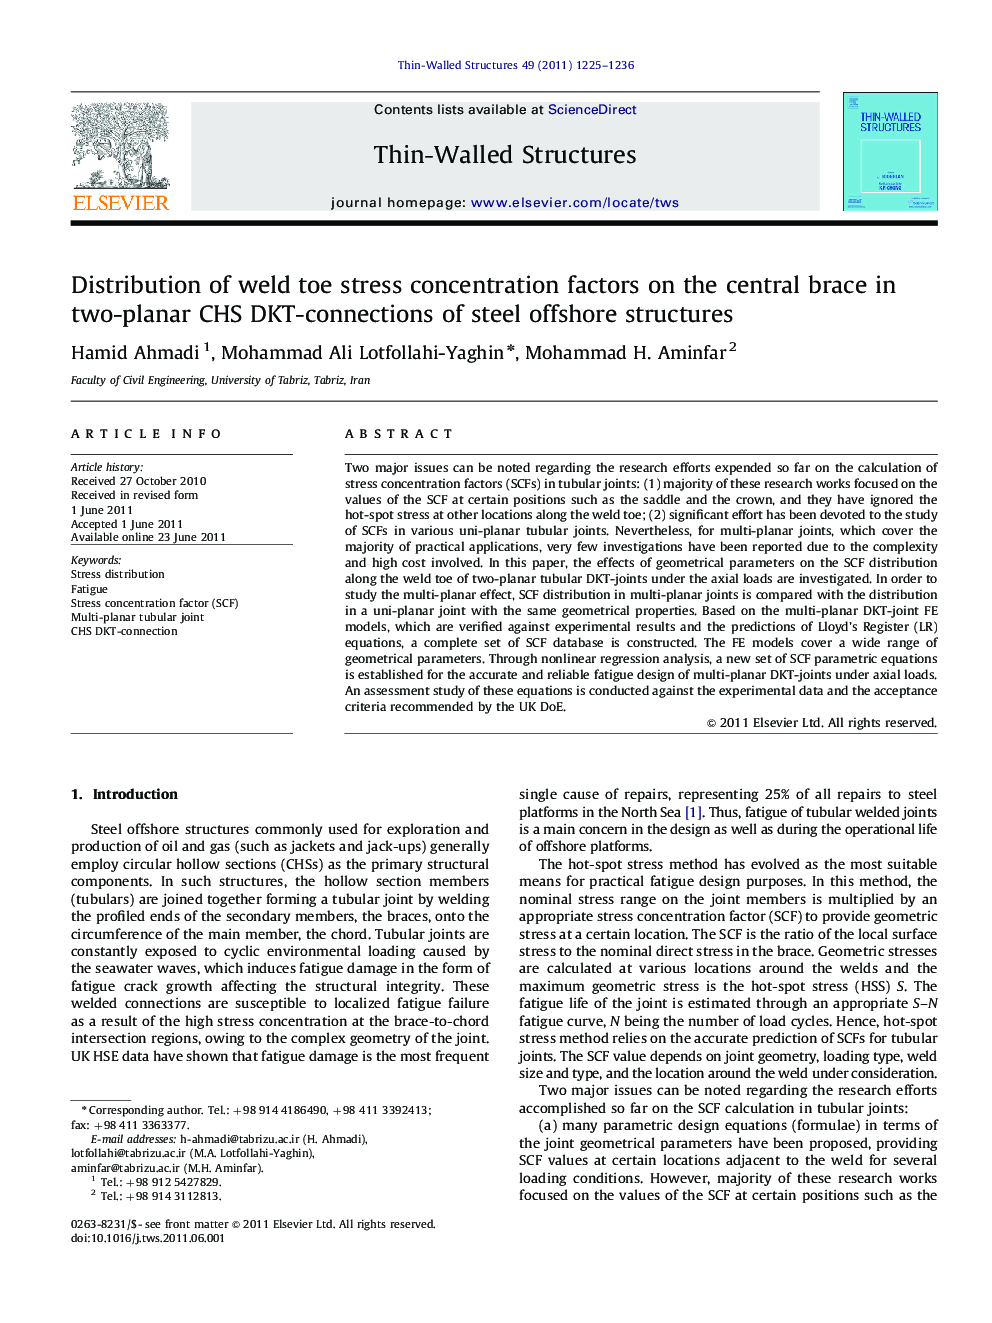 Distribution of weld toe stress concentration factors on the central brace in two-planar CHS DKT-connections of steel offshore structures